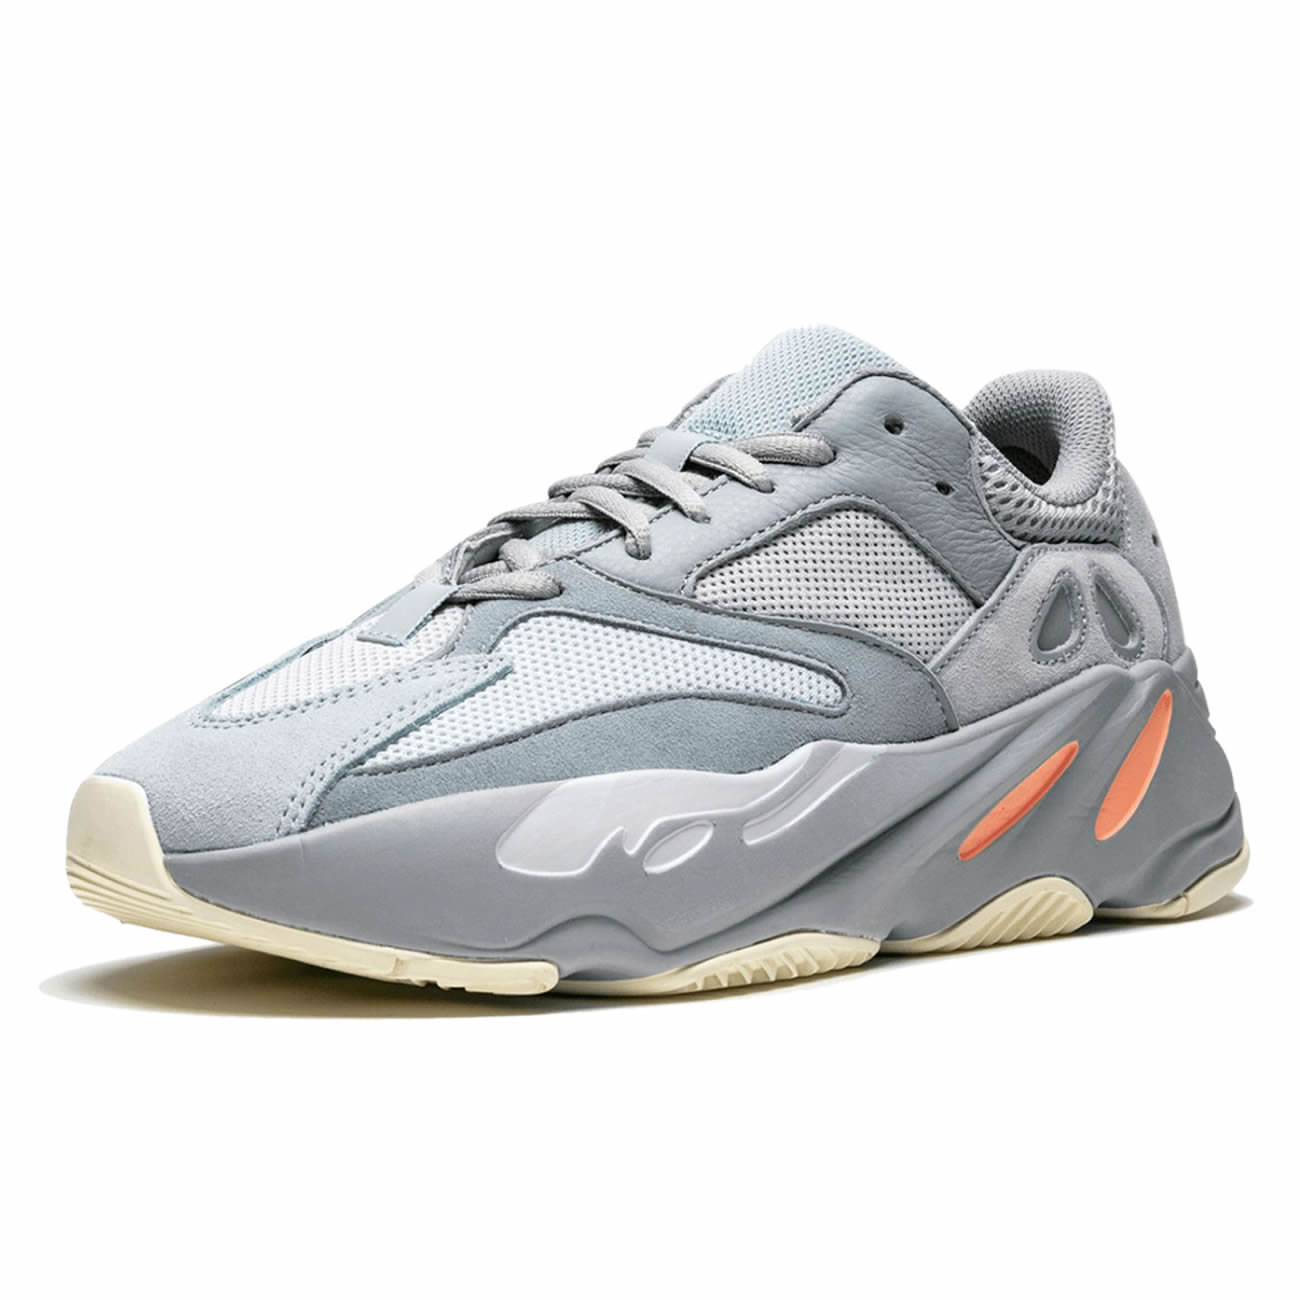 adidas Yeezy Boost 700 "Inertia" 2019 Outfit Release Date EG7597